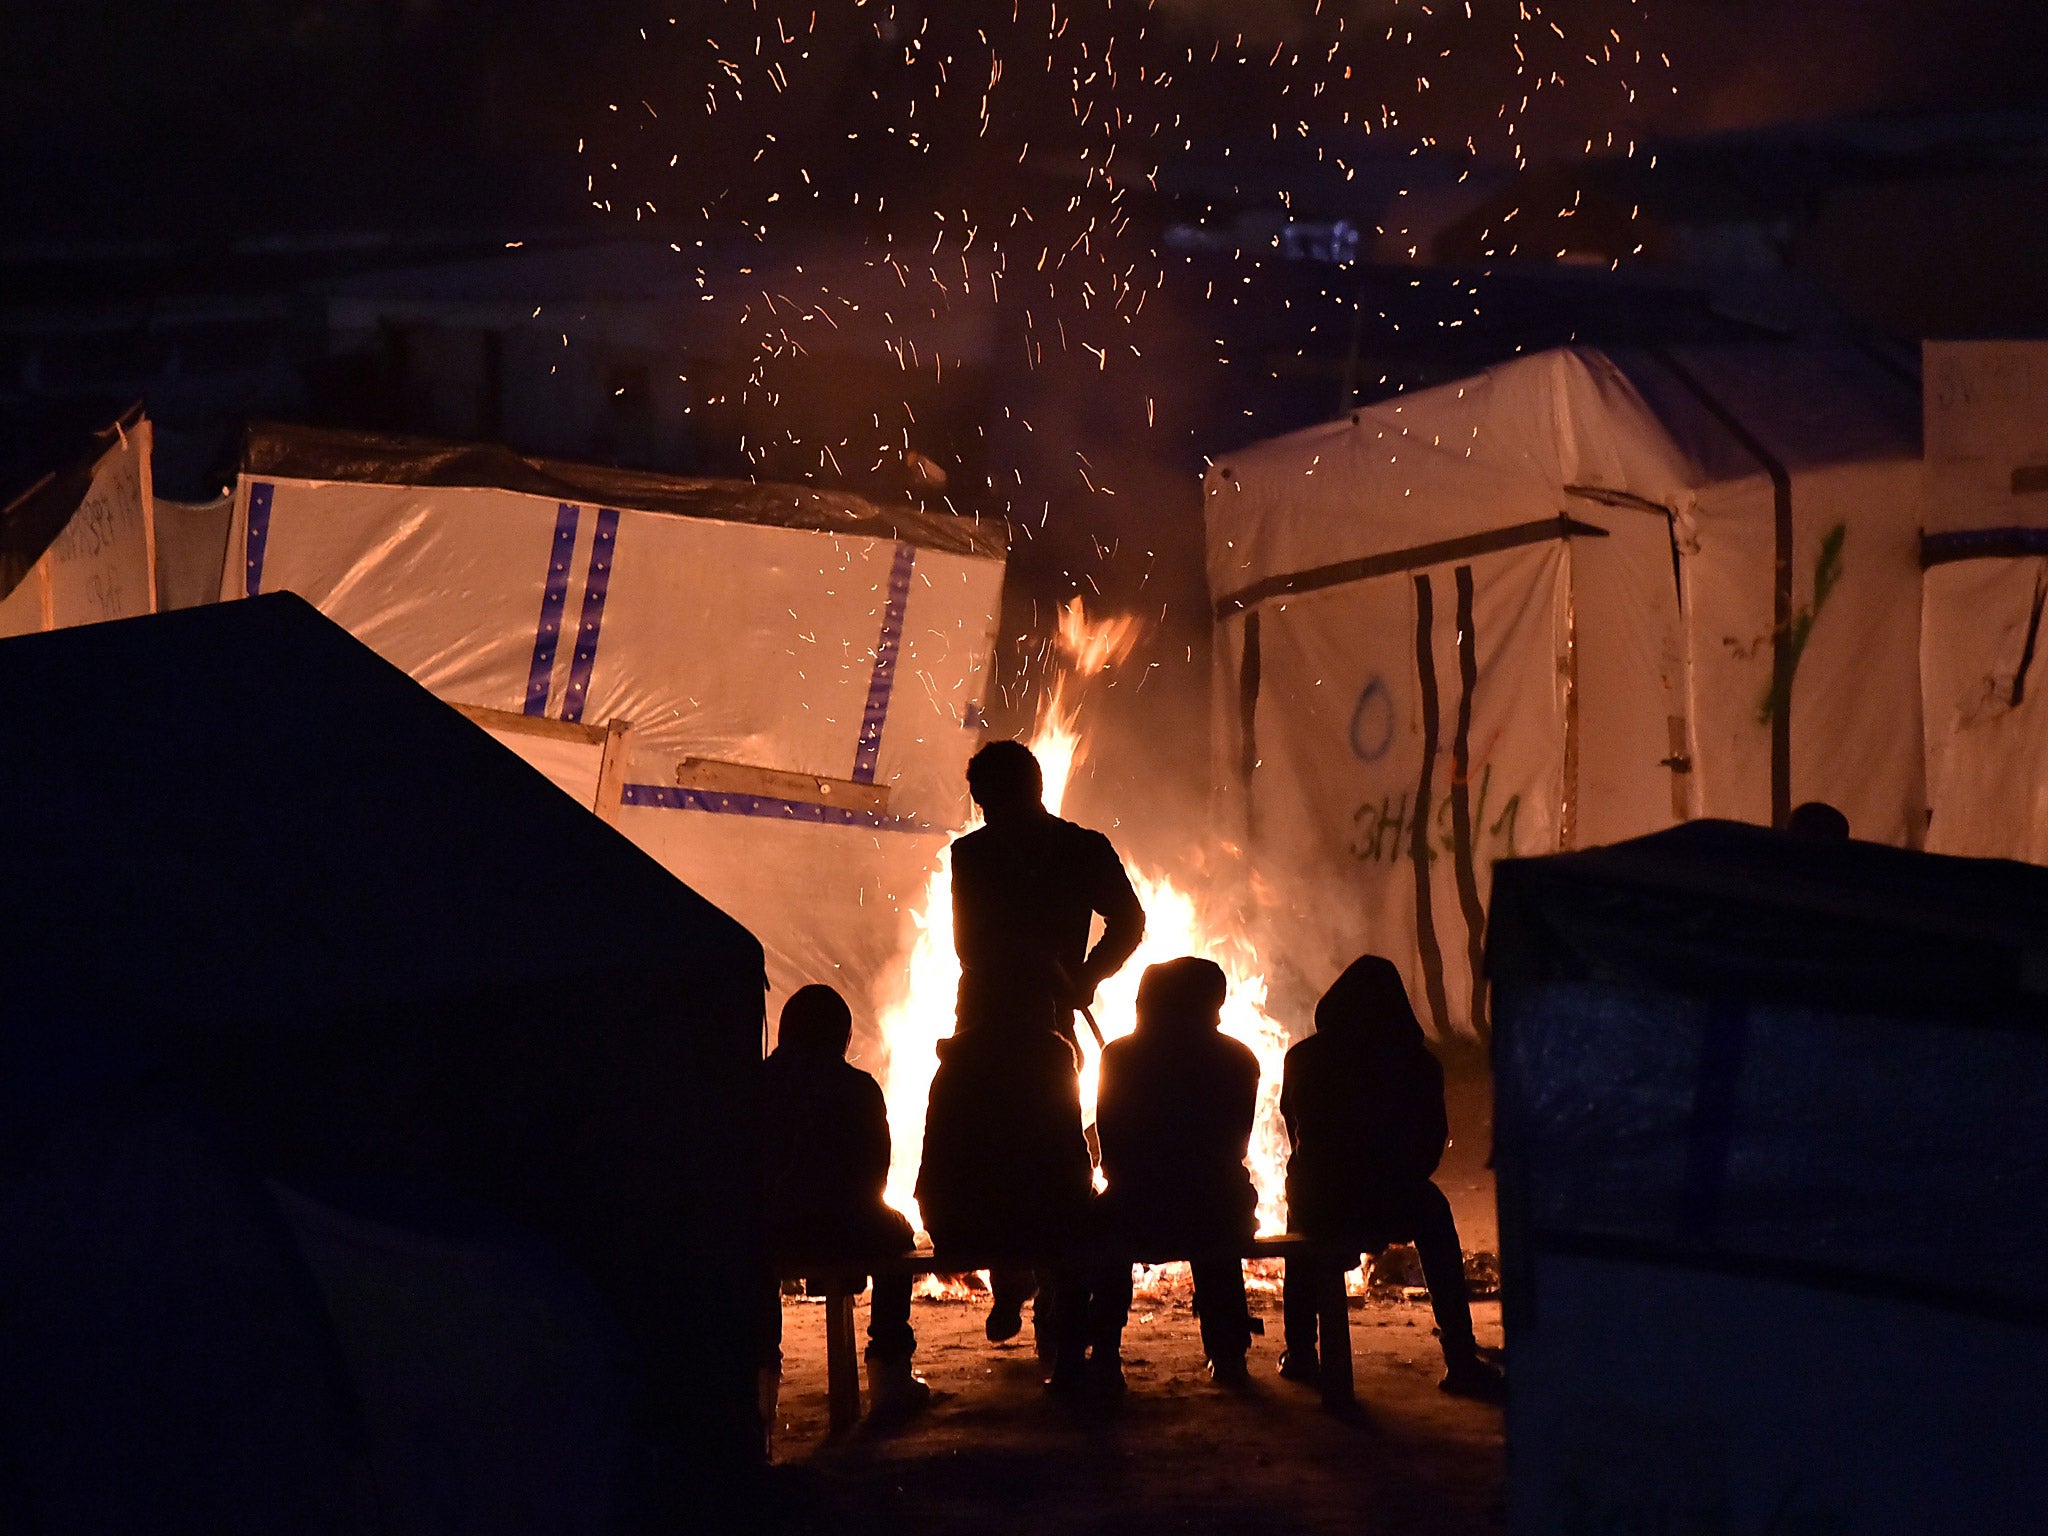 Migrants gather around a bonfire to warm up in the 'Jungle' migrant camp in Calais